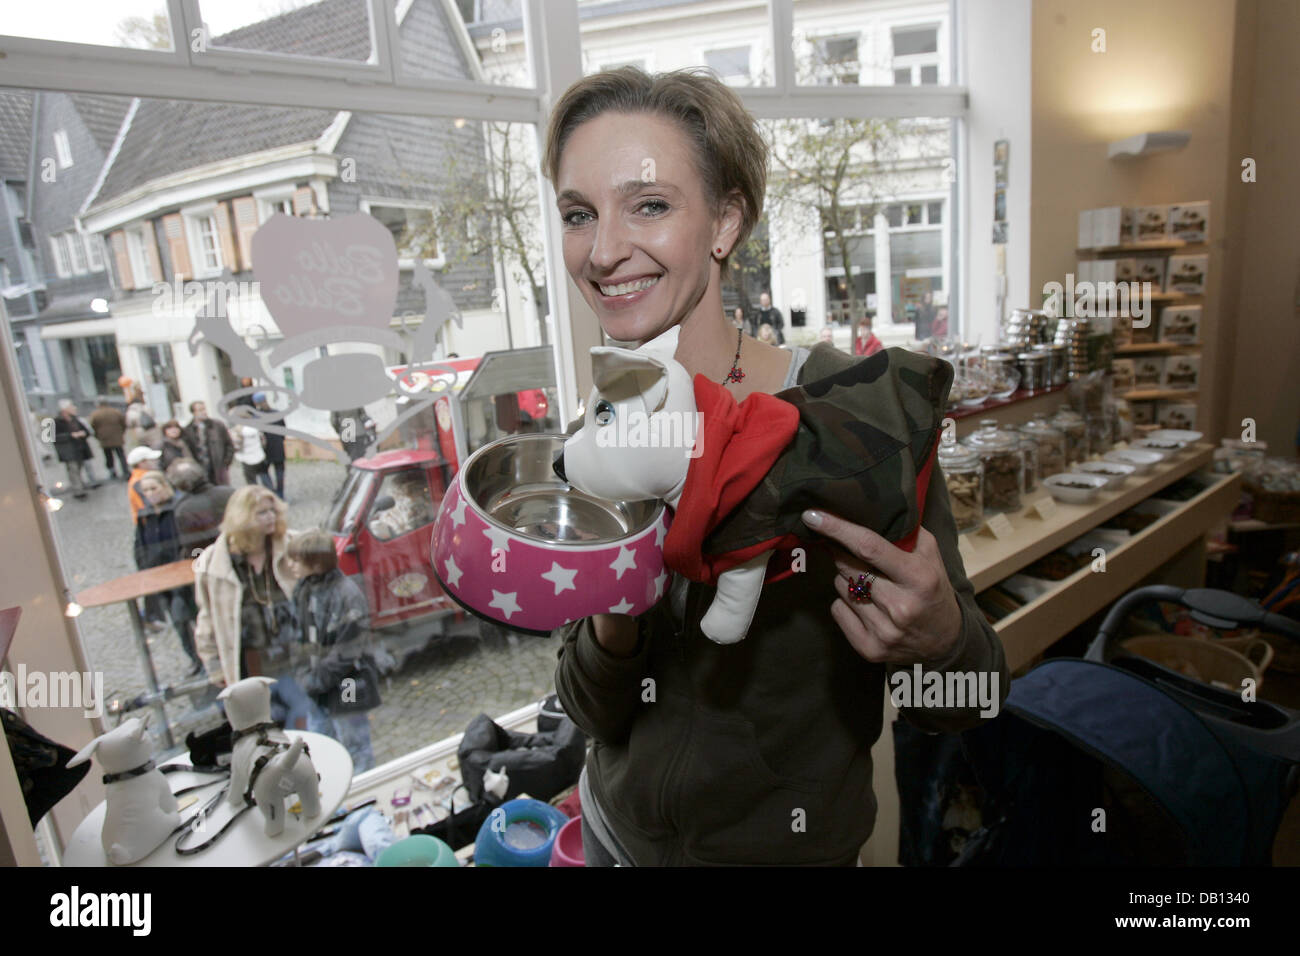 Actress Conny Niedrig poses with dog toys at the opening of her dog parlour in Essen, Germany, 28 October 2007. With the opening  of the shop a long entertained youth dream came true for Niedrig, who stars in the SAT1 serial ?Niedrig und Kuhnt?. Photo: Joerg Carstensen Stock Photo